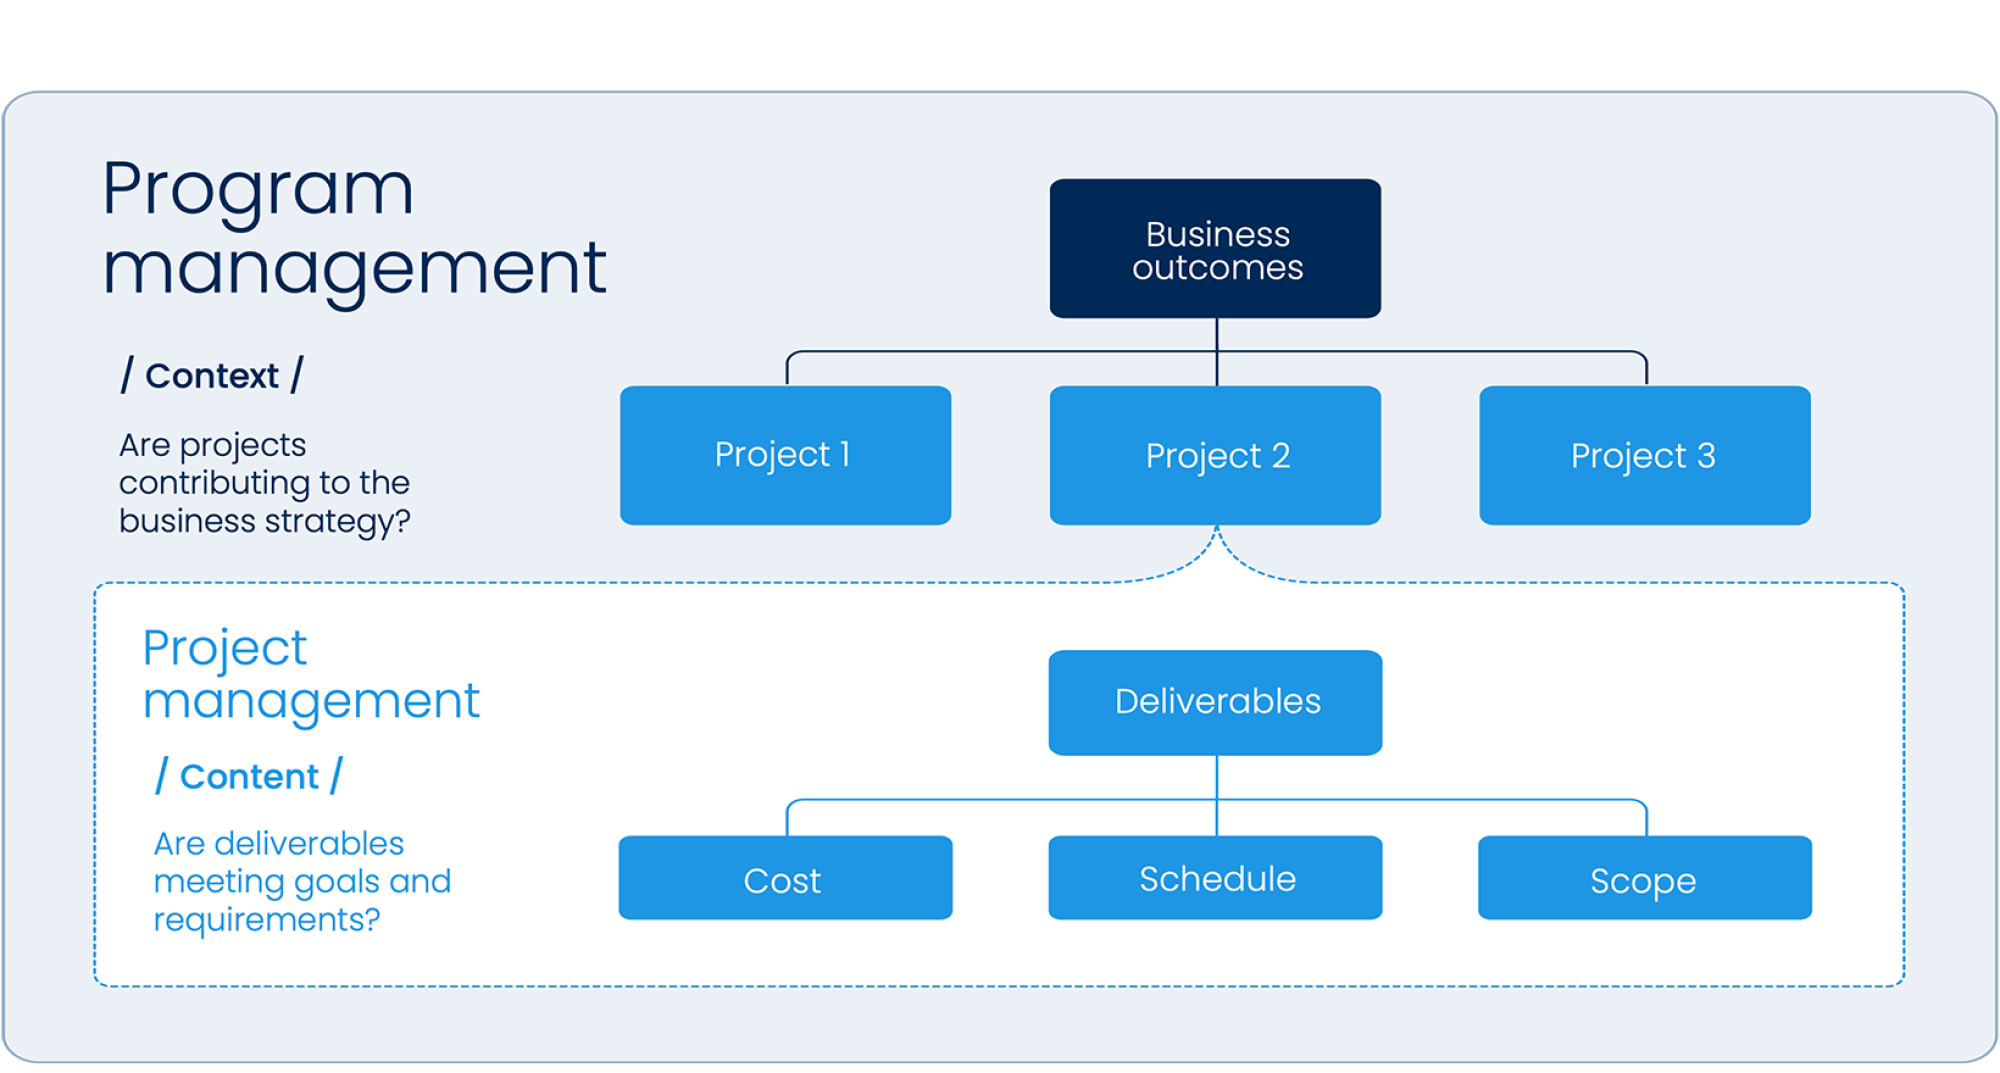 Diagram showing the relationship between program management and project management